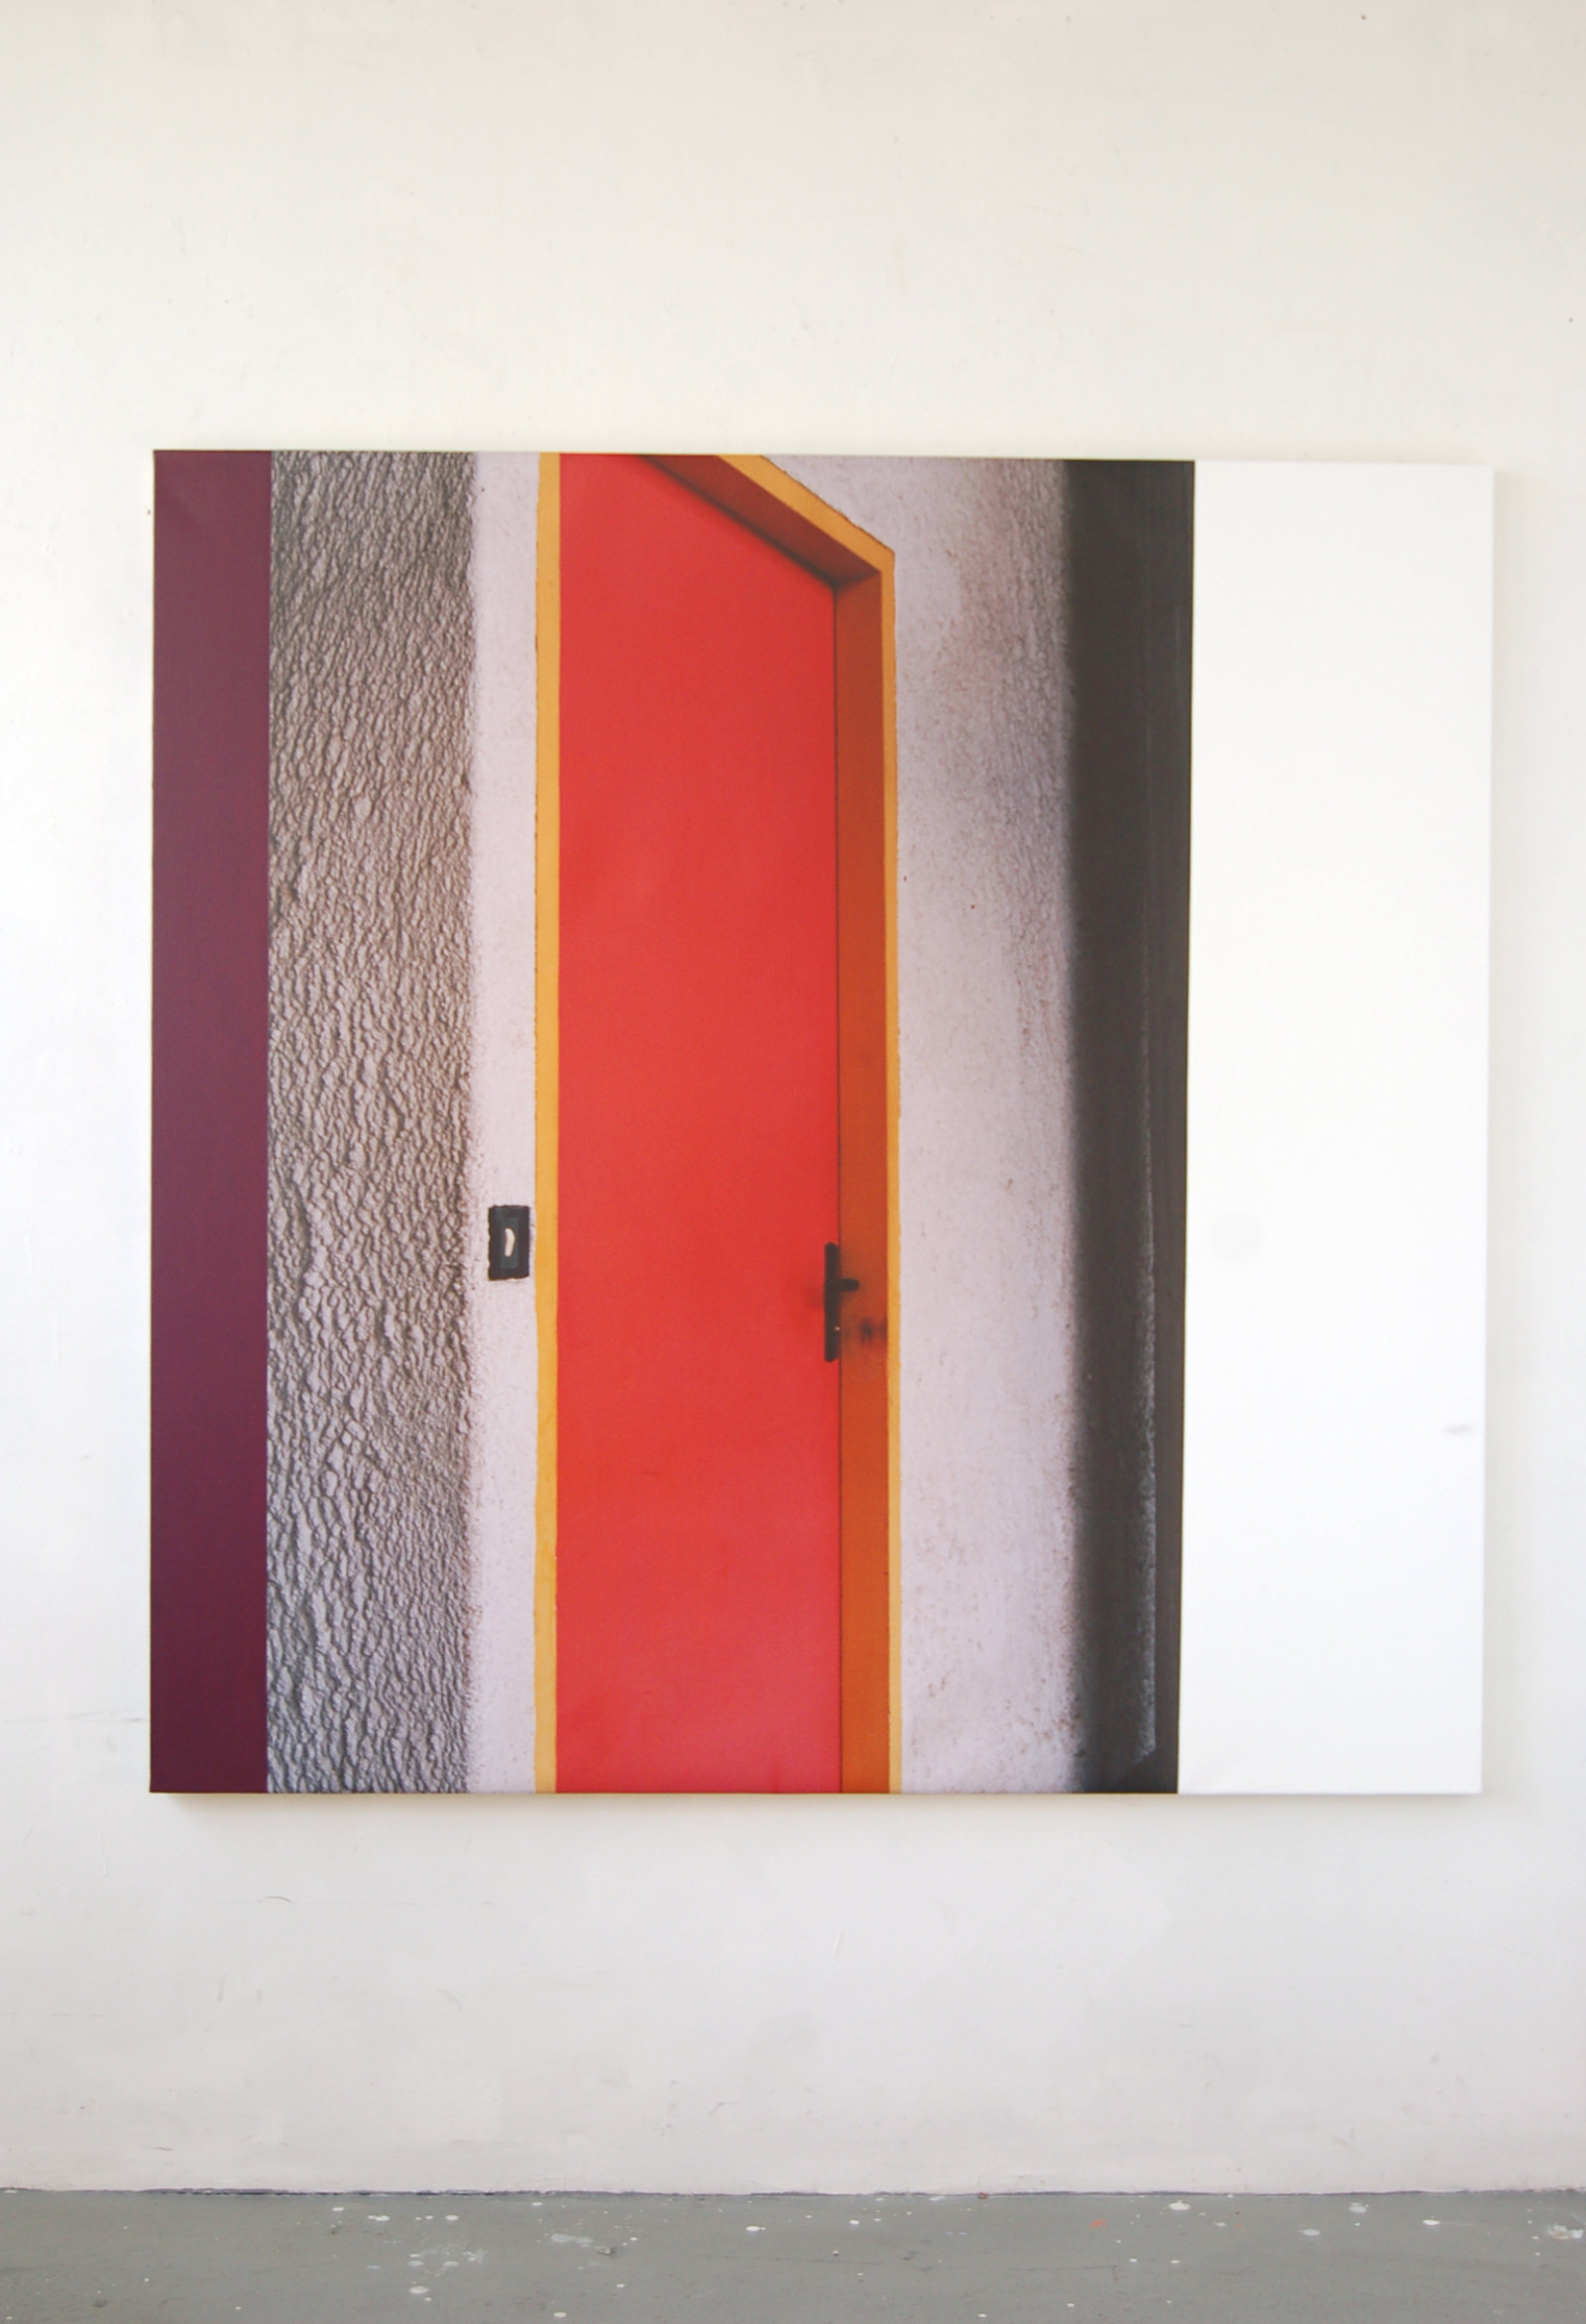 Ian Wallace, La Tourette (Exterior of Cell), 2006, photolaminate and acrylic on canvas, 60 x 60 in. (152 x 152 cm)